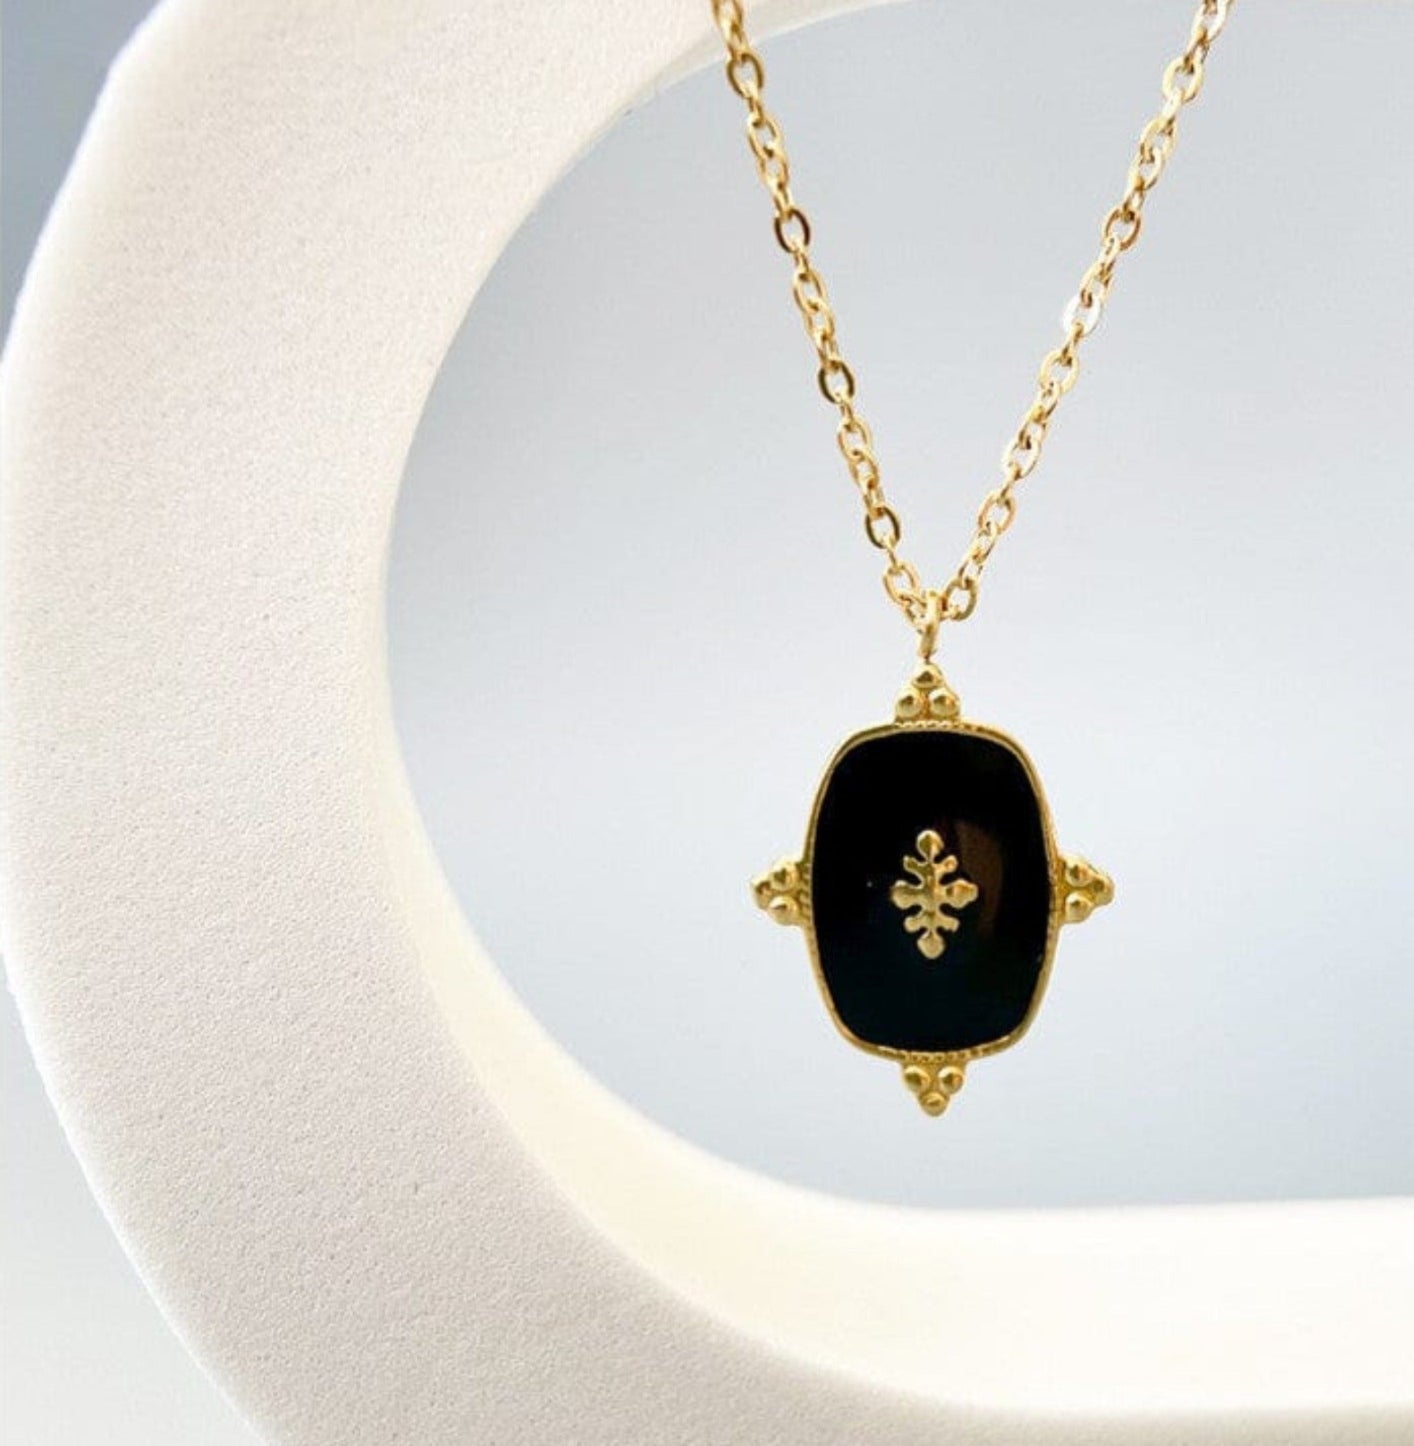 DARK NECKLACE neck Yubama Jewelry Online Store - The Elegant Designs of Gold and Silver ! 